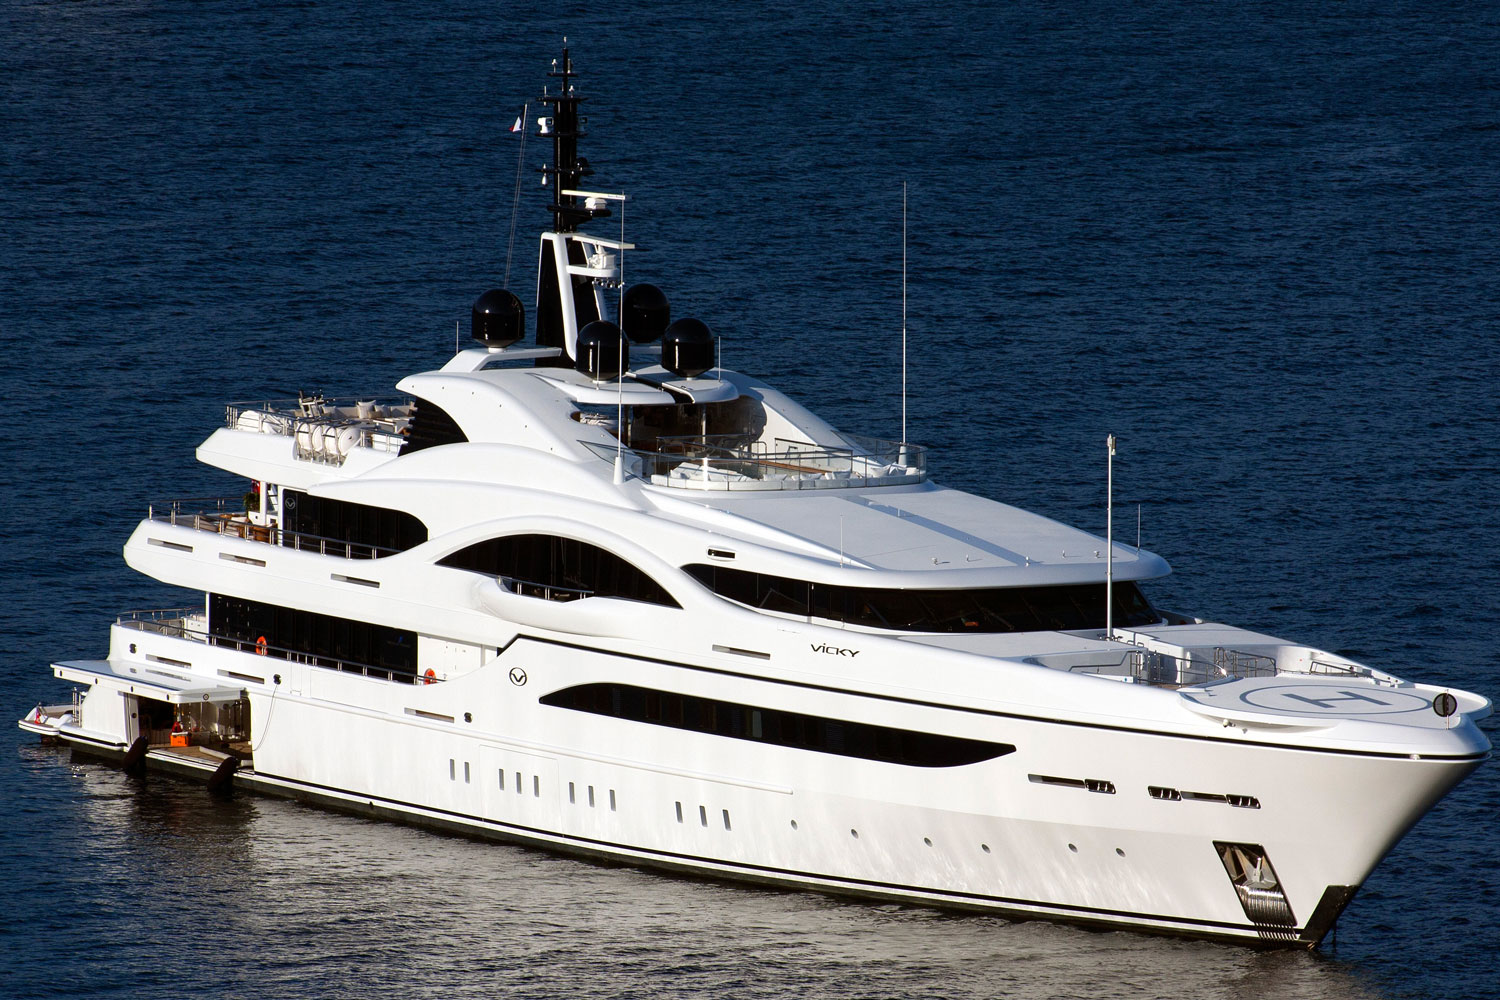 Video Shows Off What It’s Really Like Inside A Massive Superyacht